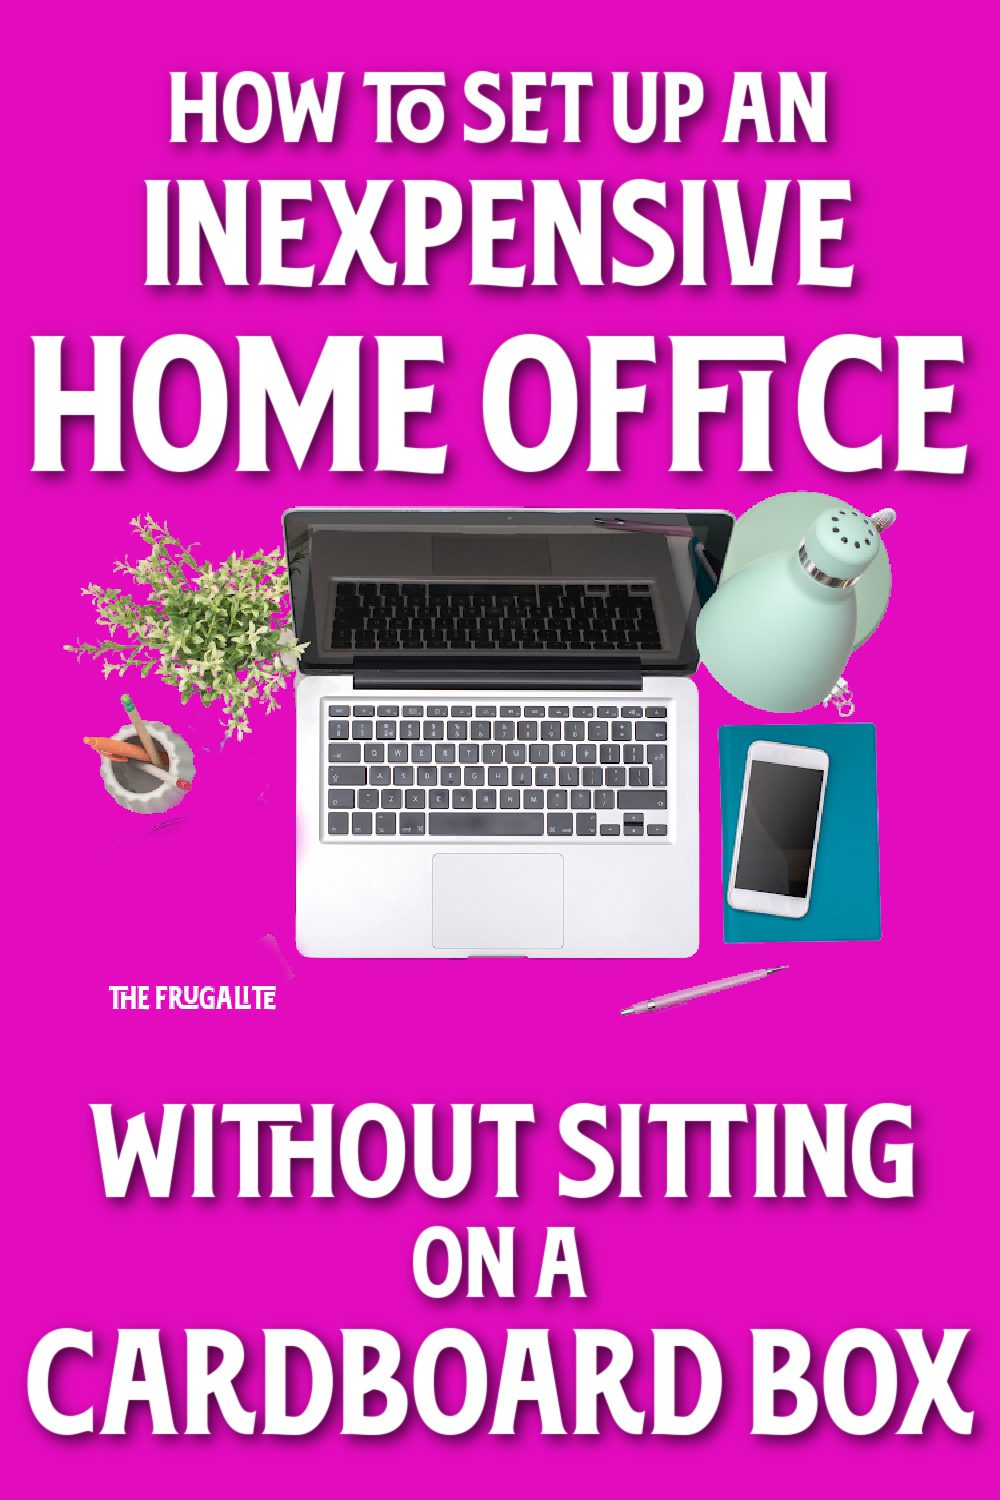 How to Set Up an Inexpensive Home Office Without Sitting on a Cardboard Box